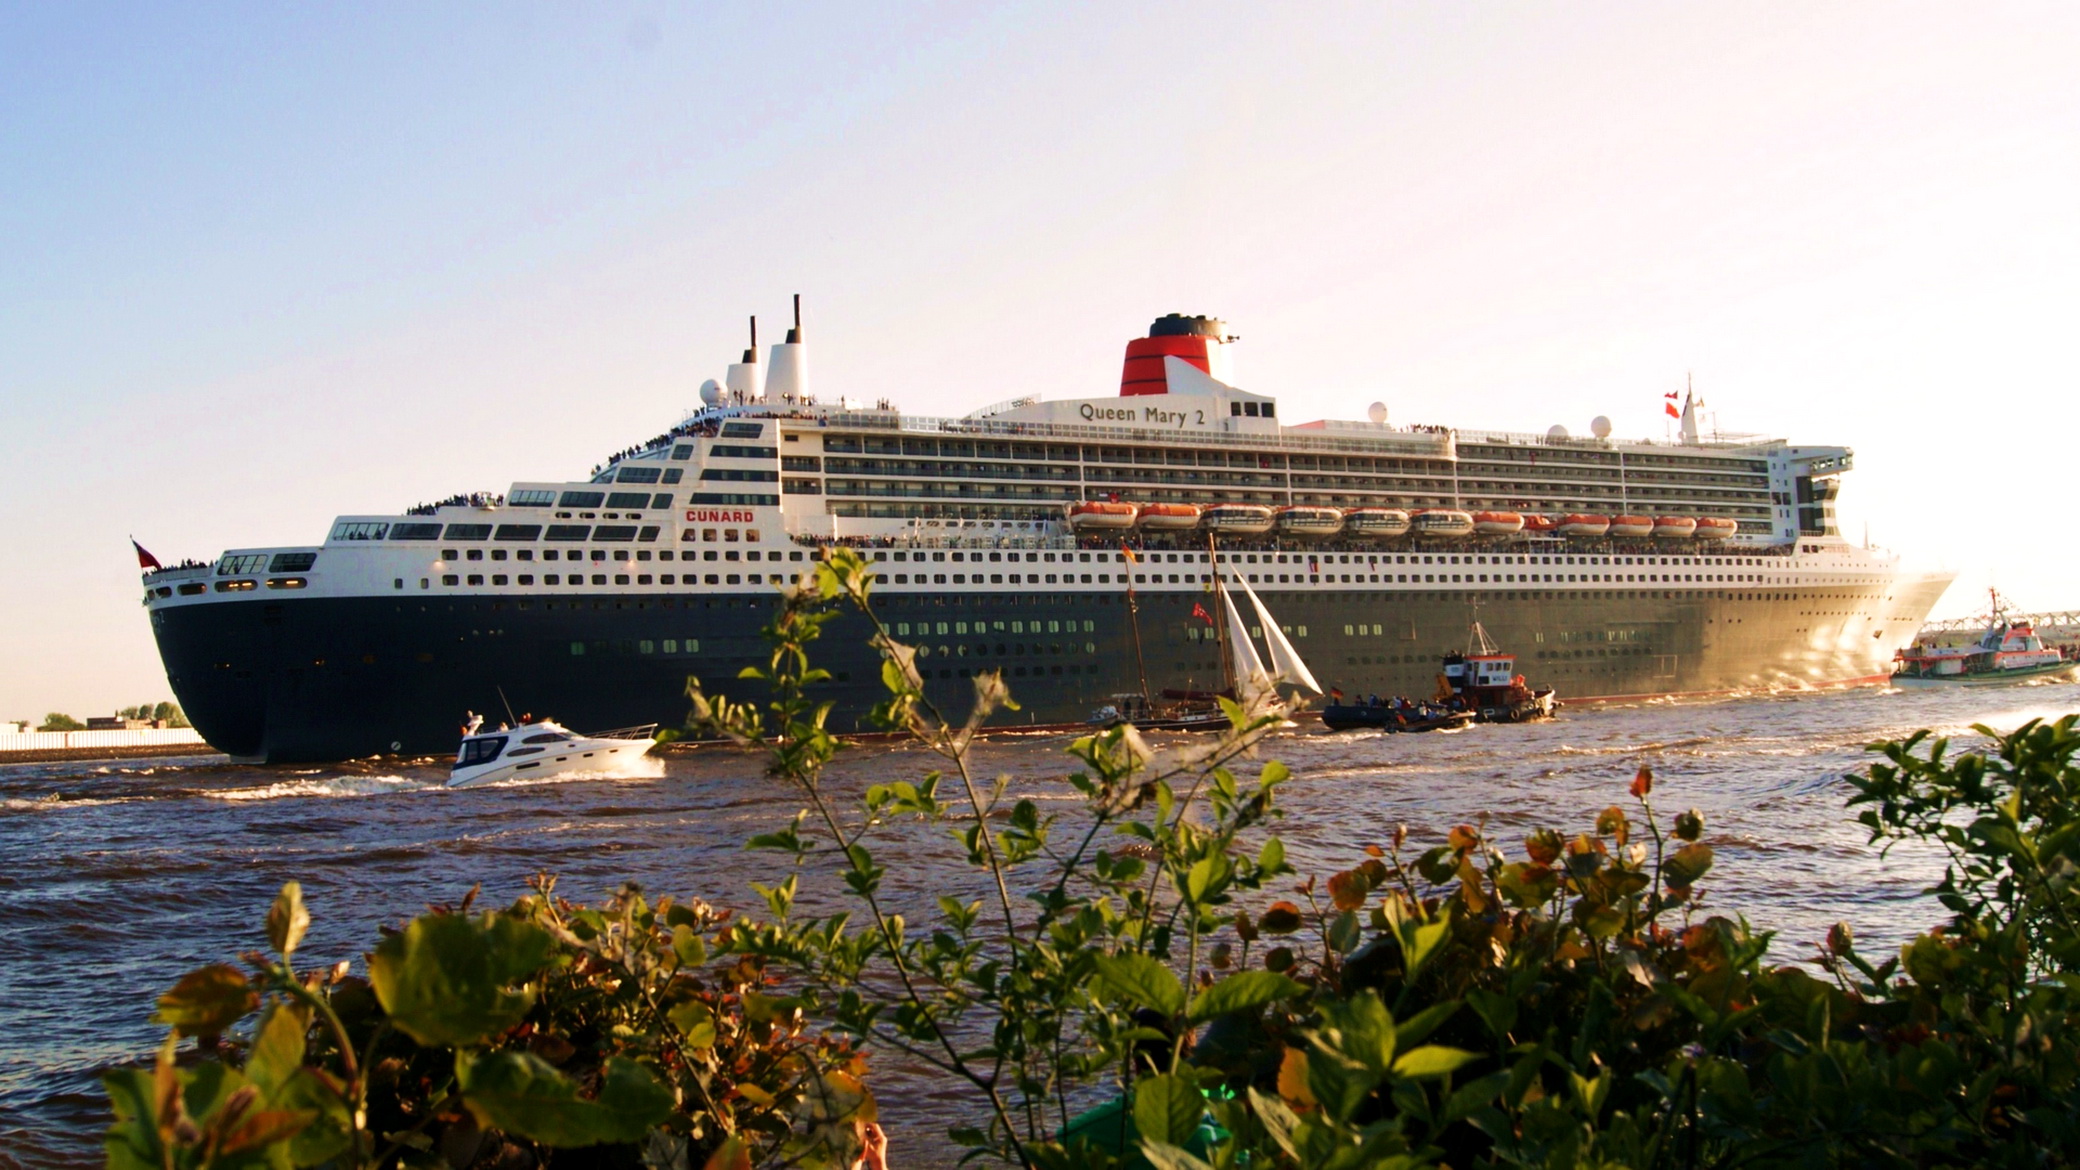 Vehicles RMS Queen Mary 2 HD Wallpaper | Background Image